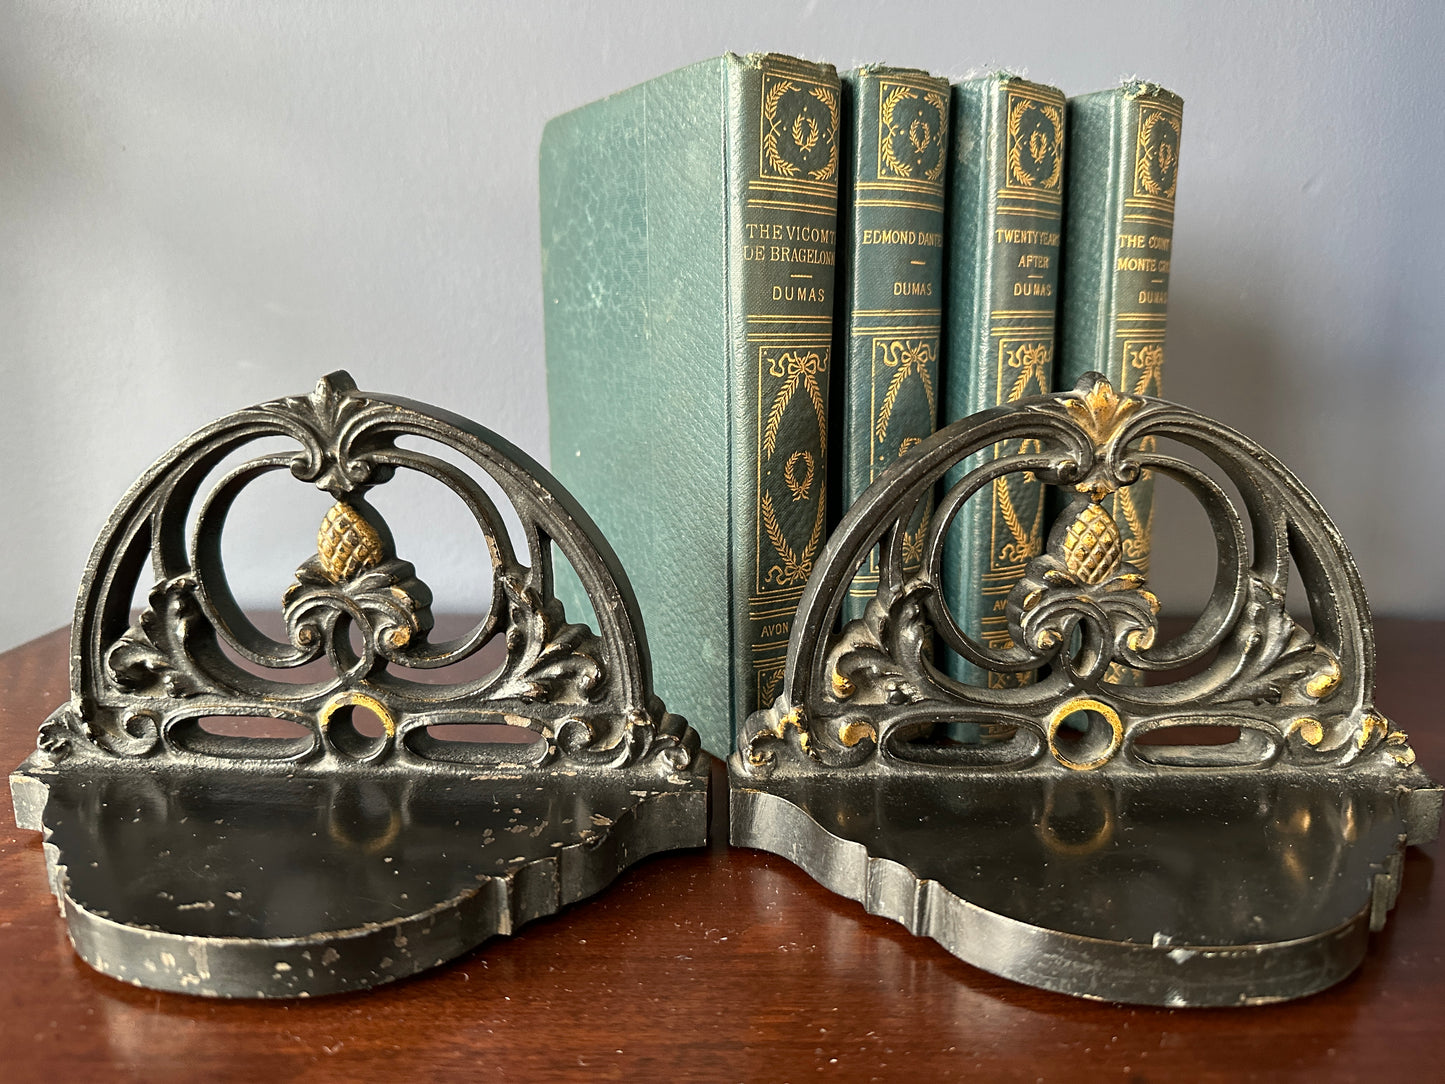 Bradley & Hubbard Bookends with Floral & Pineapple Motif